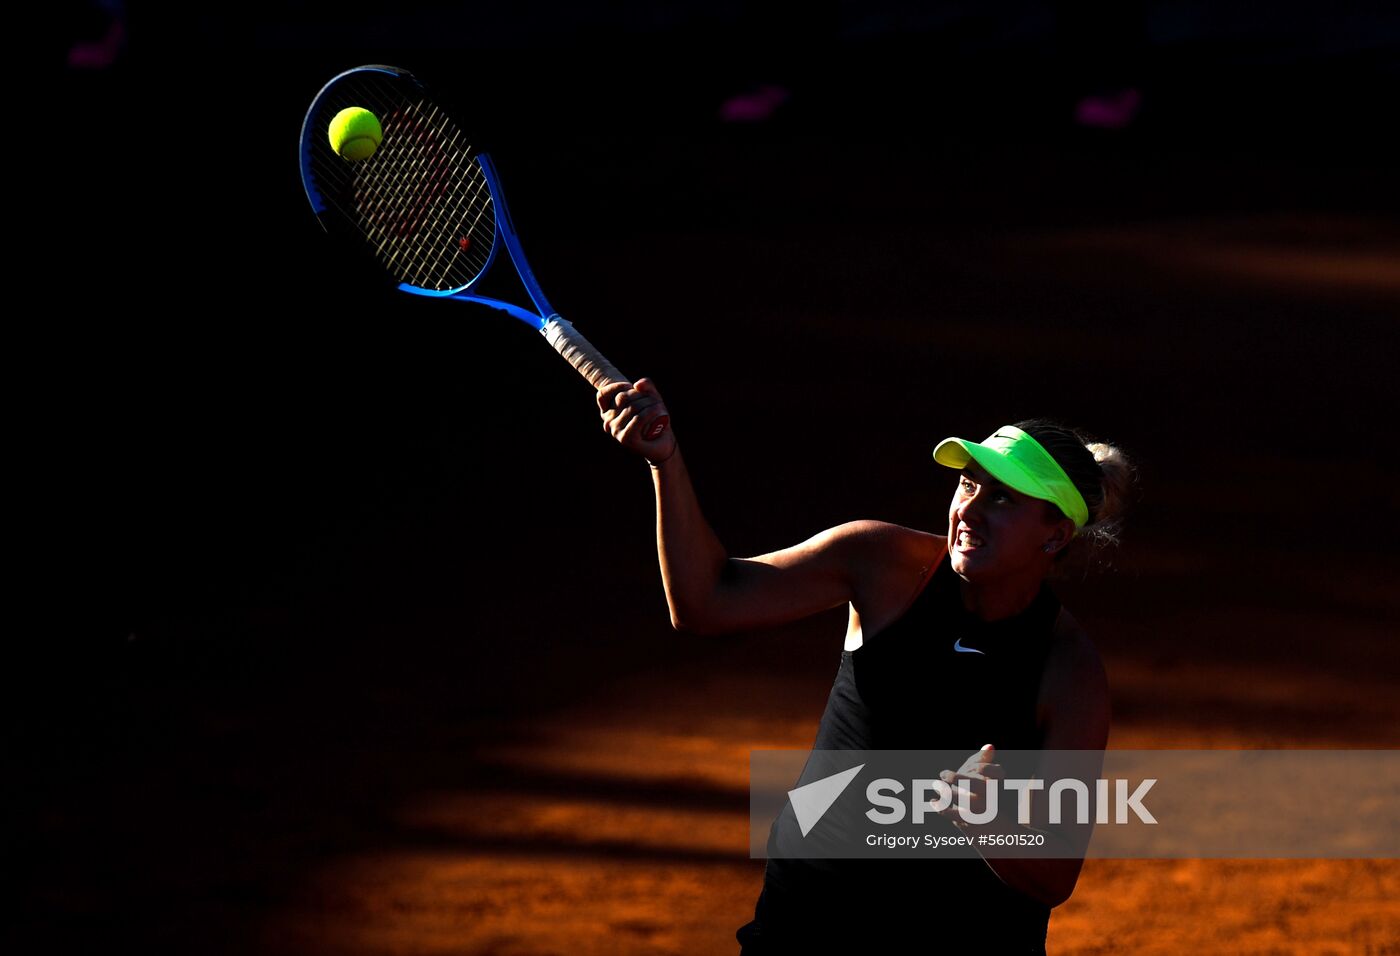 Tennis. WTA Moscow River Cup. Finals